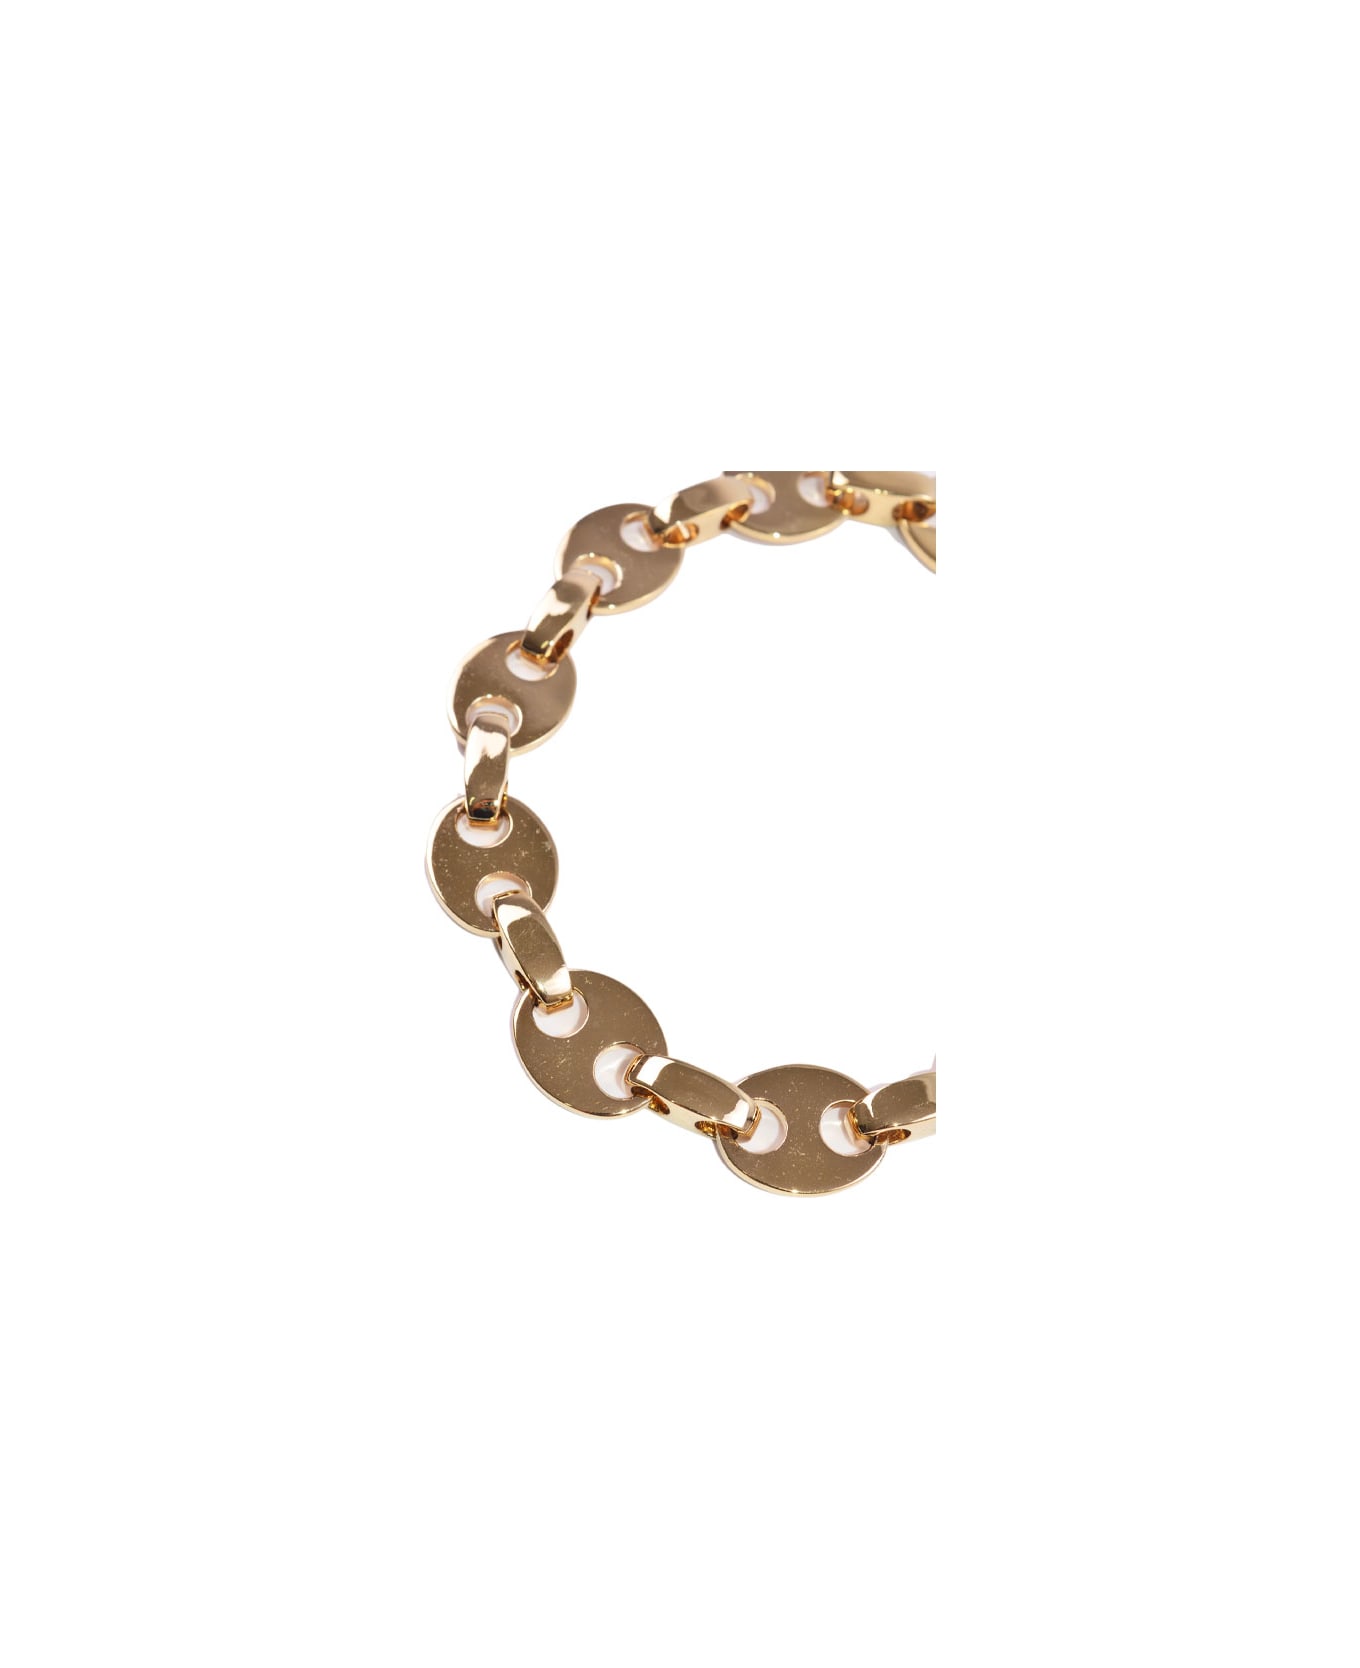 Paco Rabanne Necklace - Gold